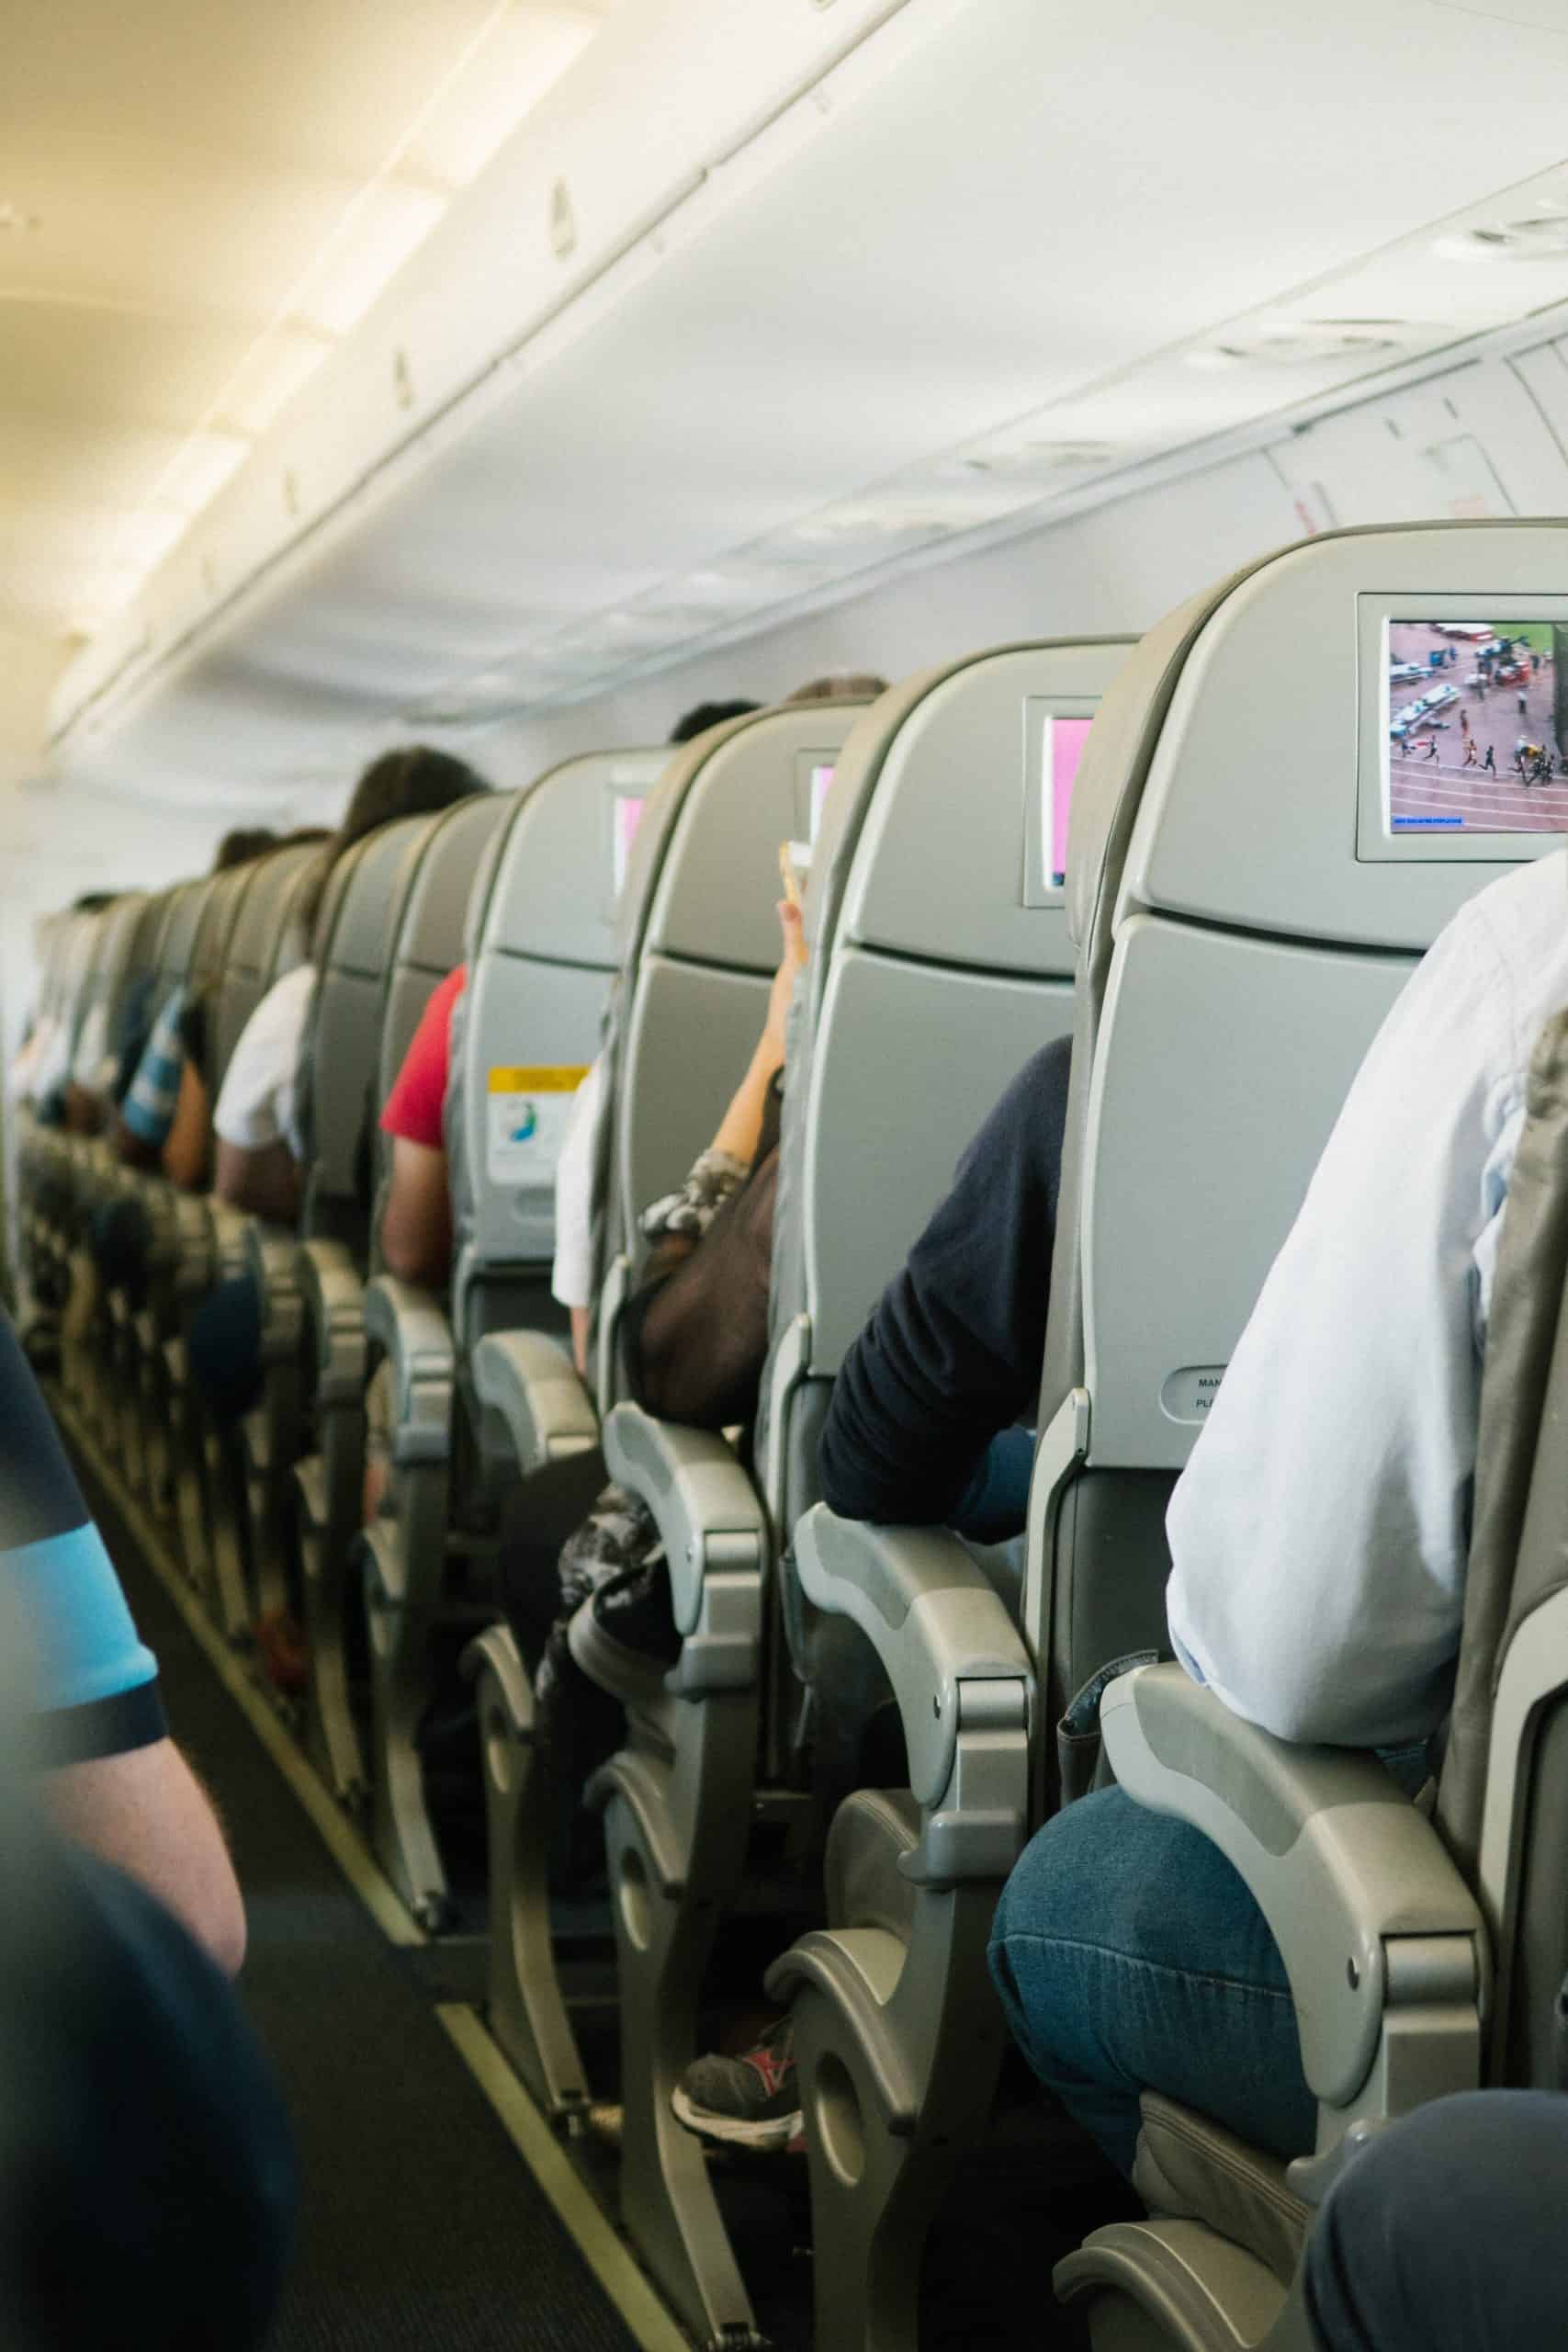 Seatbelt Sizes On A Plane: Everything You Need To Know